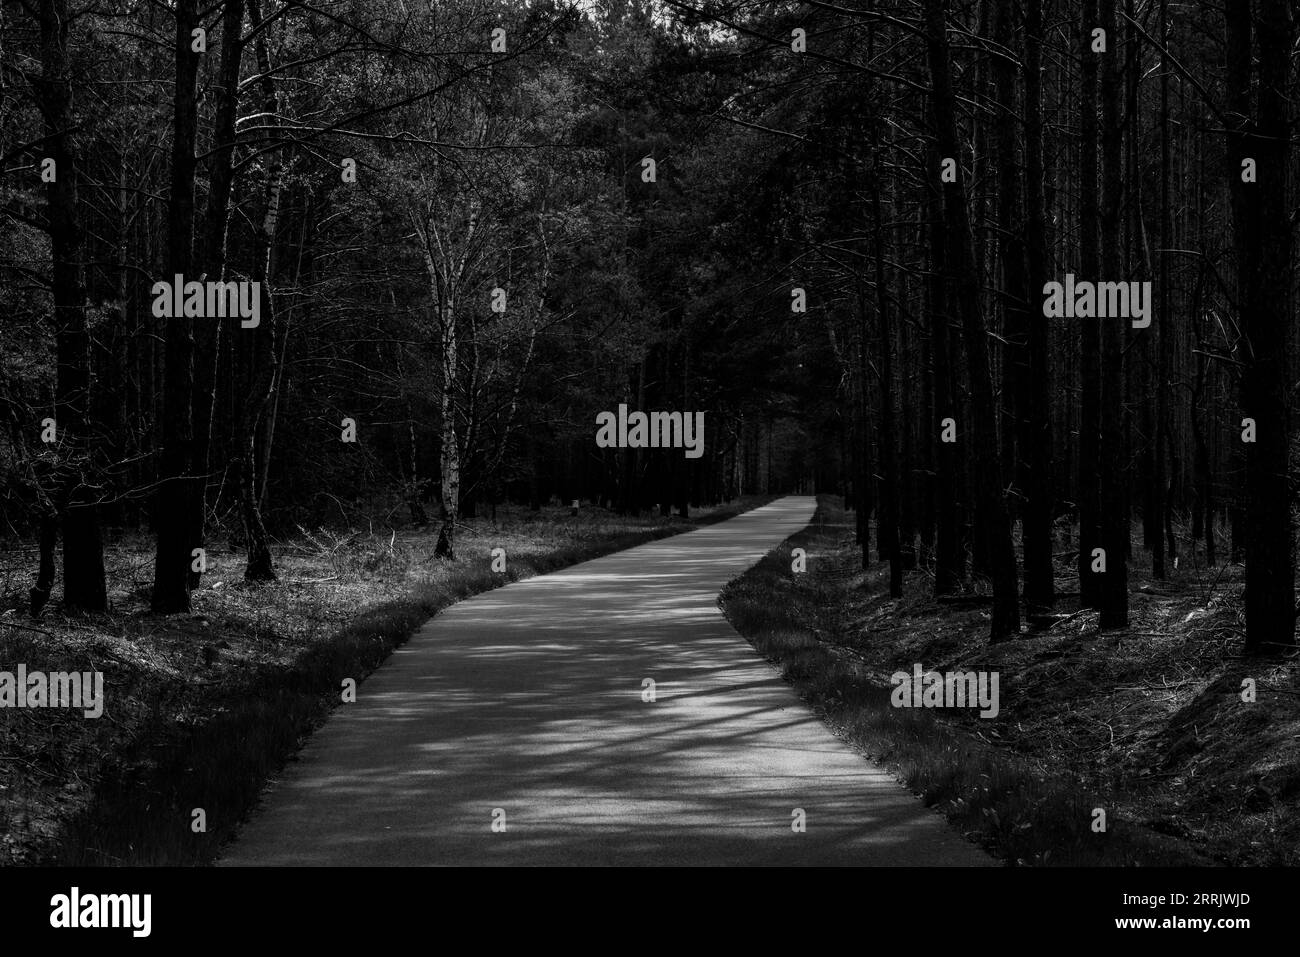 Bike path in the forest, black and white Stock Photo